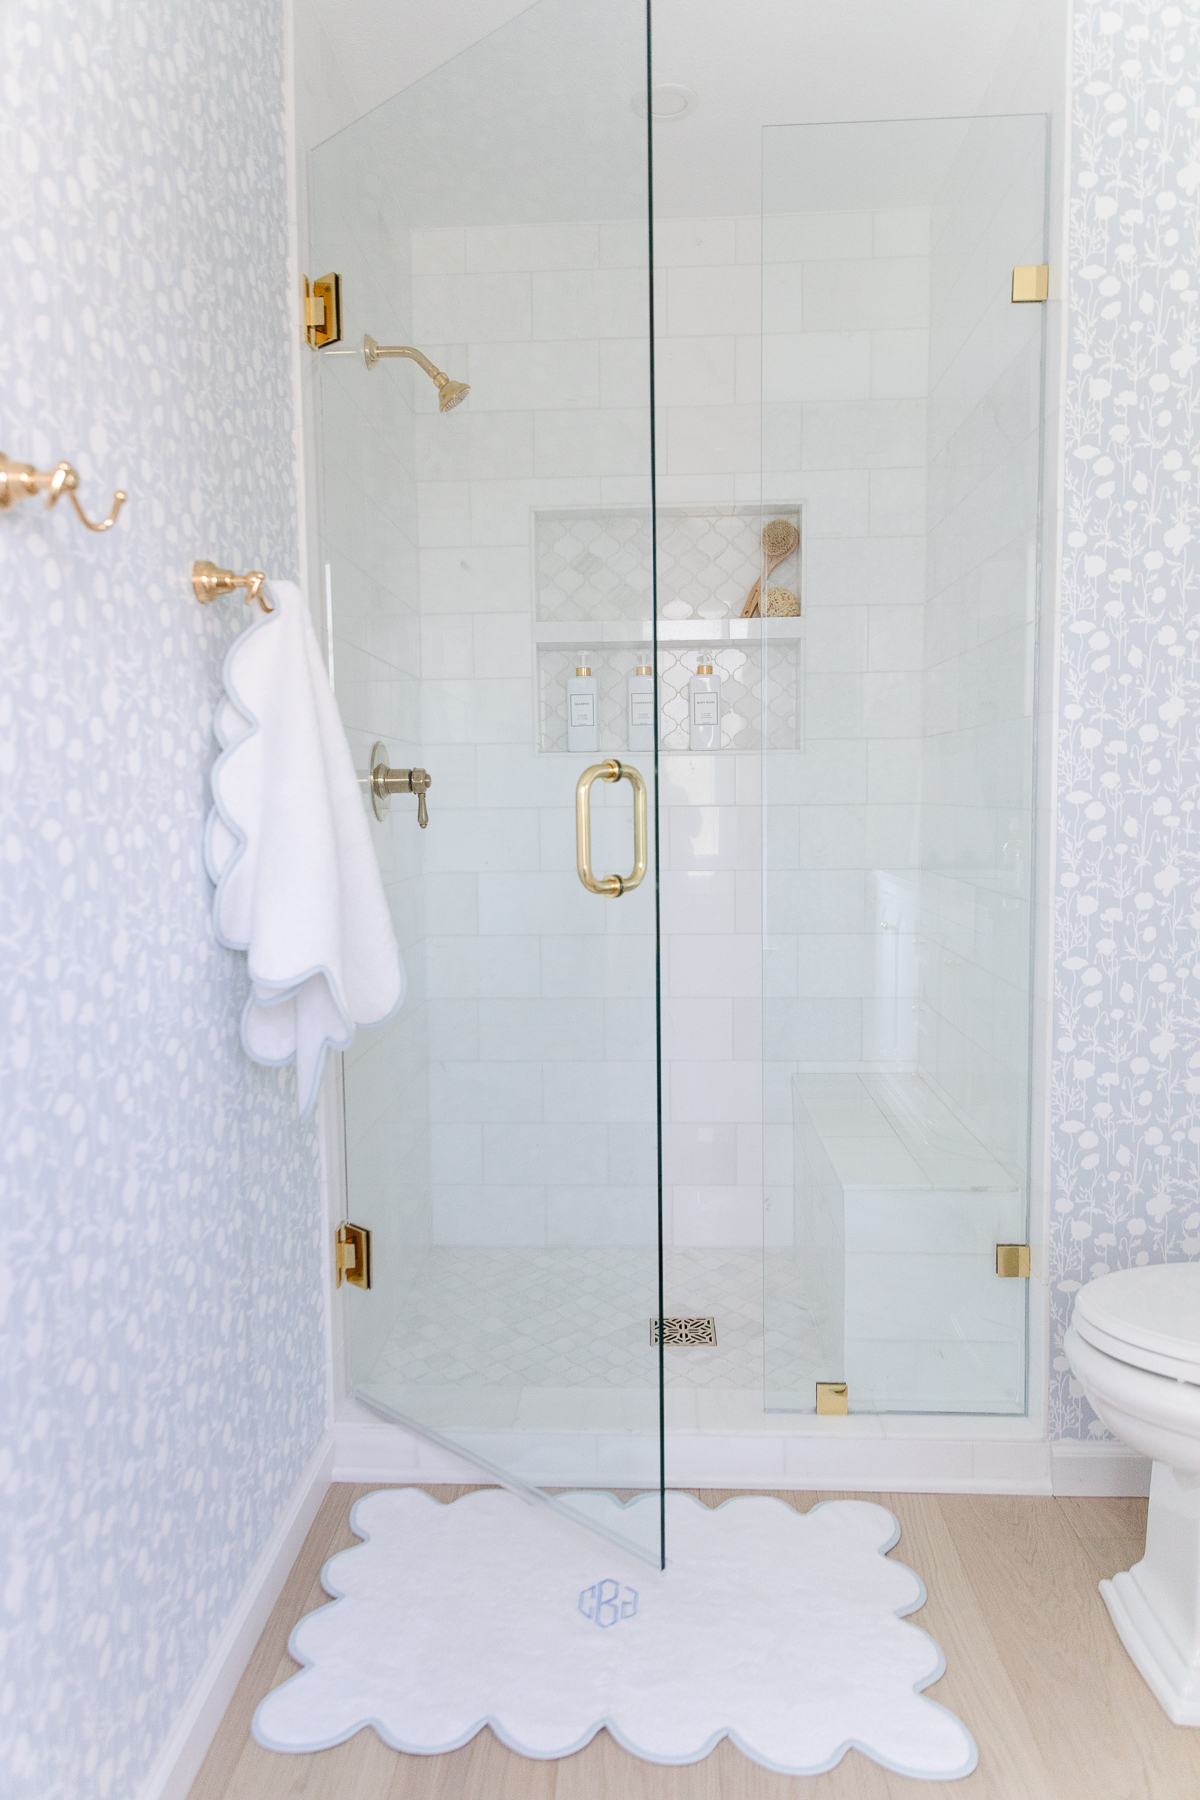 A white tiled shower with a glass door